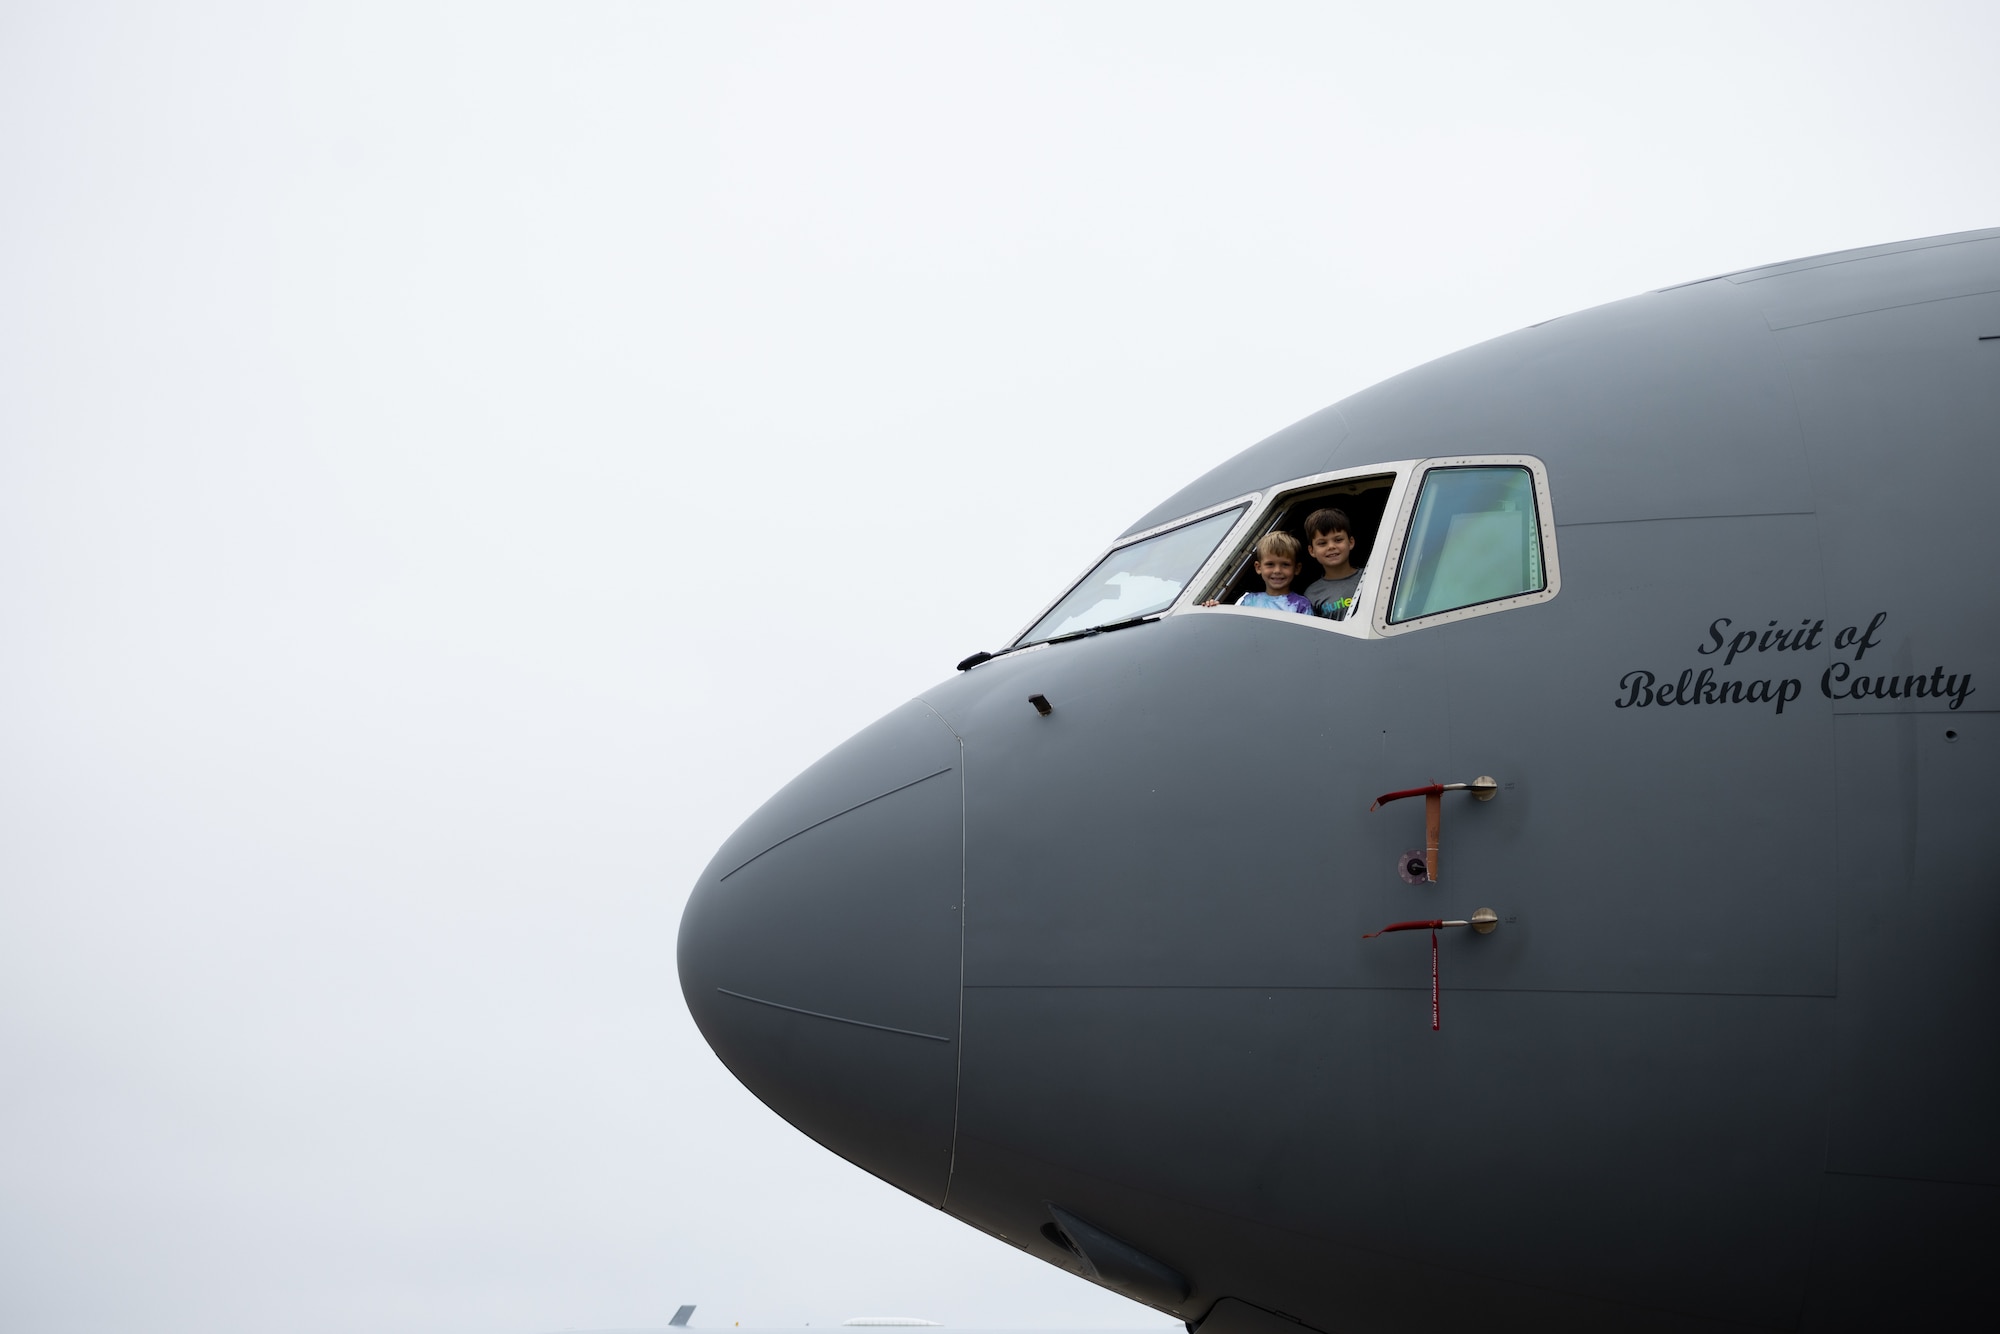 two children poke their heads out of the KC-46 cockpit window